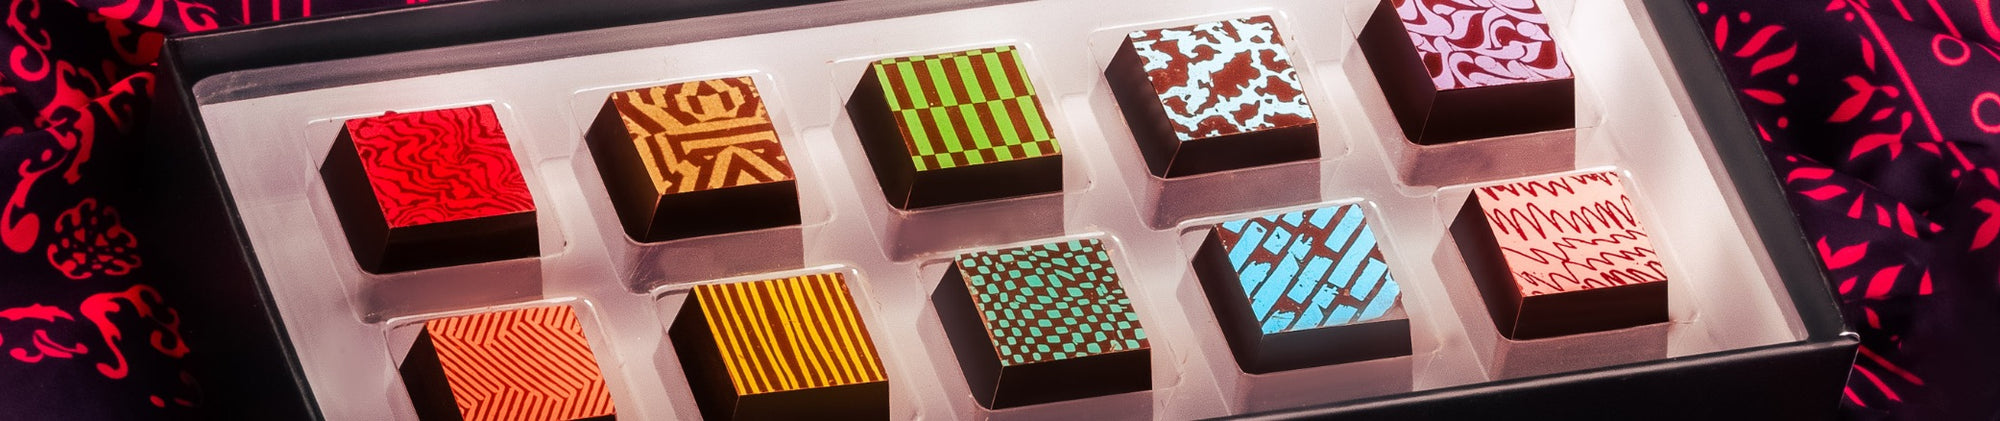 Gourmet Chocolate Gifts Under $50